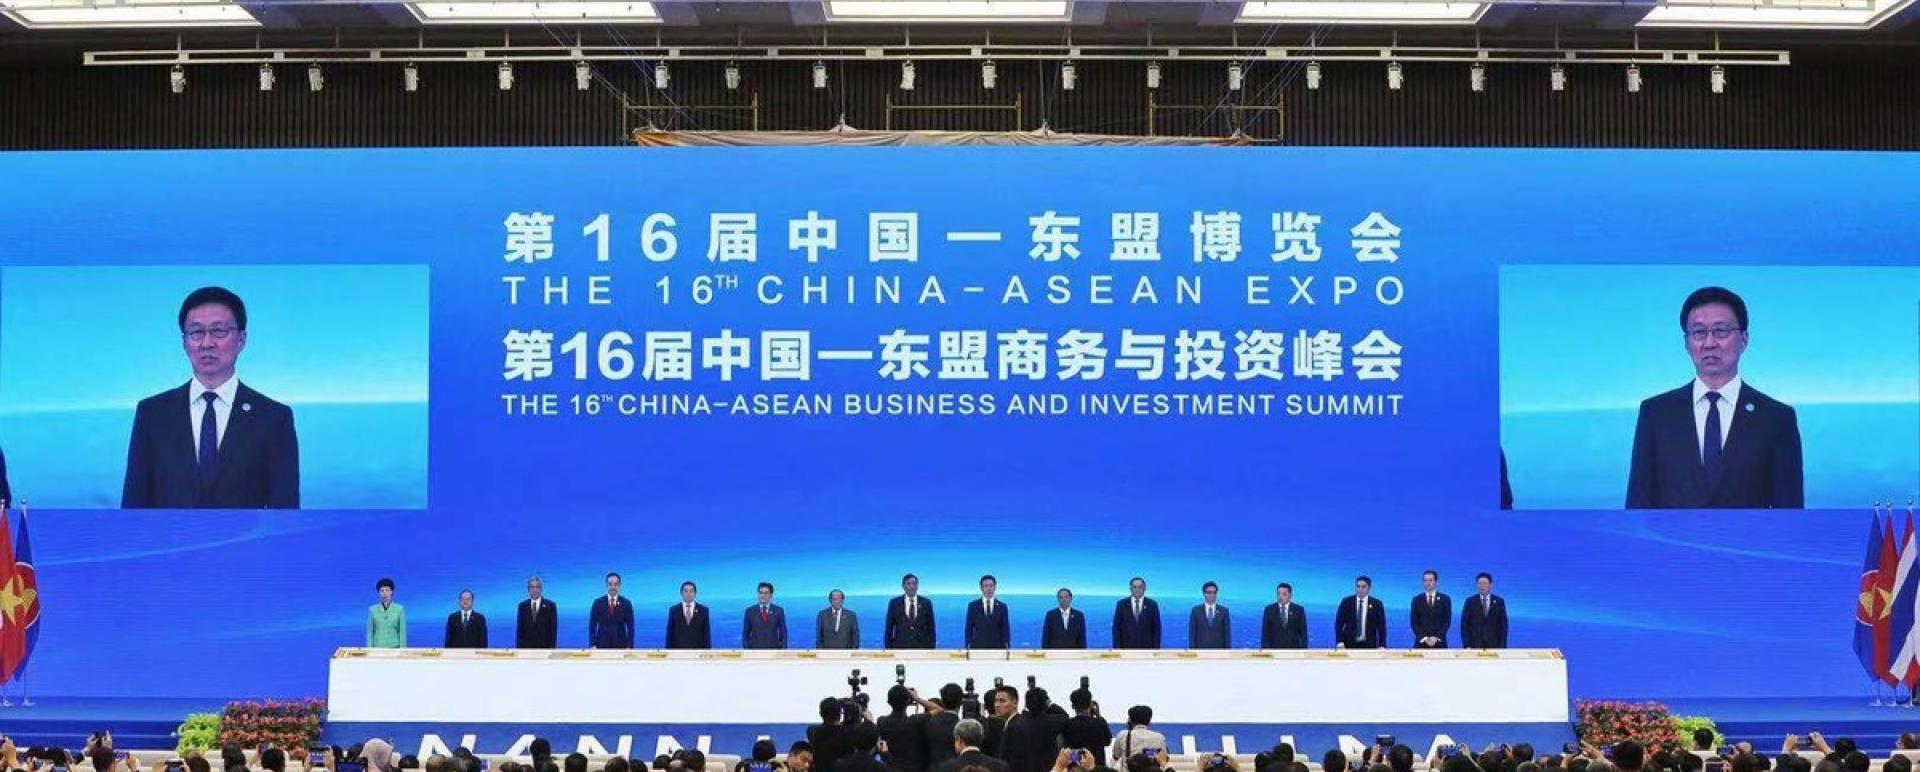 The 16th China-ASEAN Expo commences Nanning, capital of China's Guangxi Zhuang Autonomous Region, on Sept 21, 2019. [Photo/IC] 